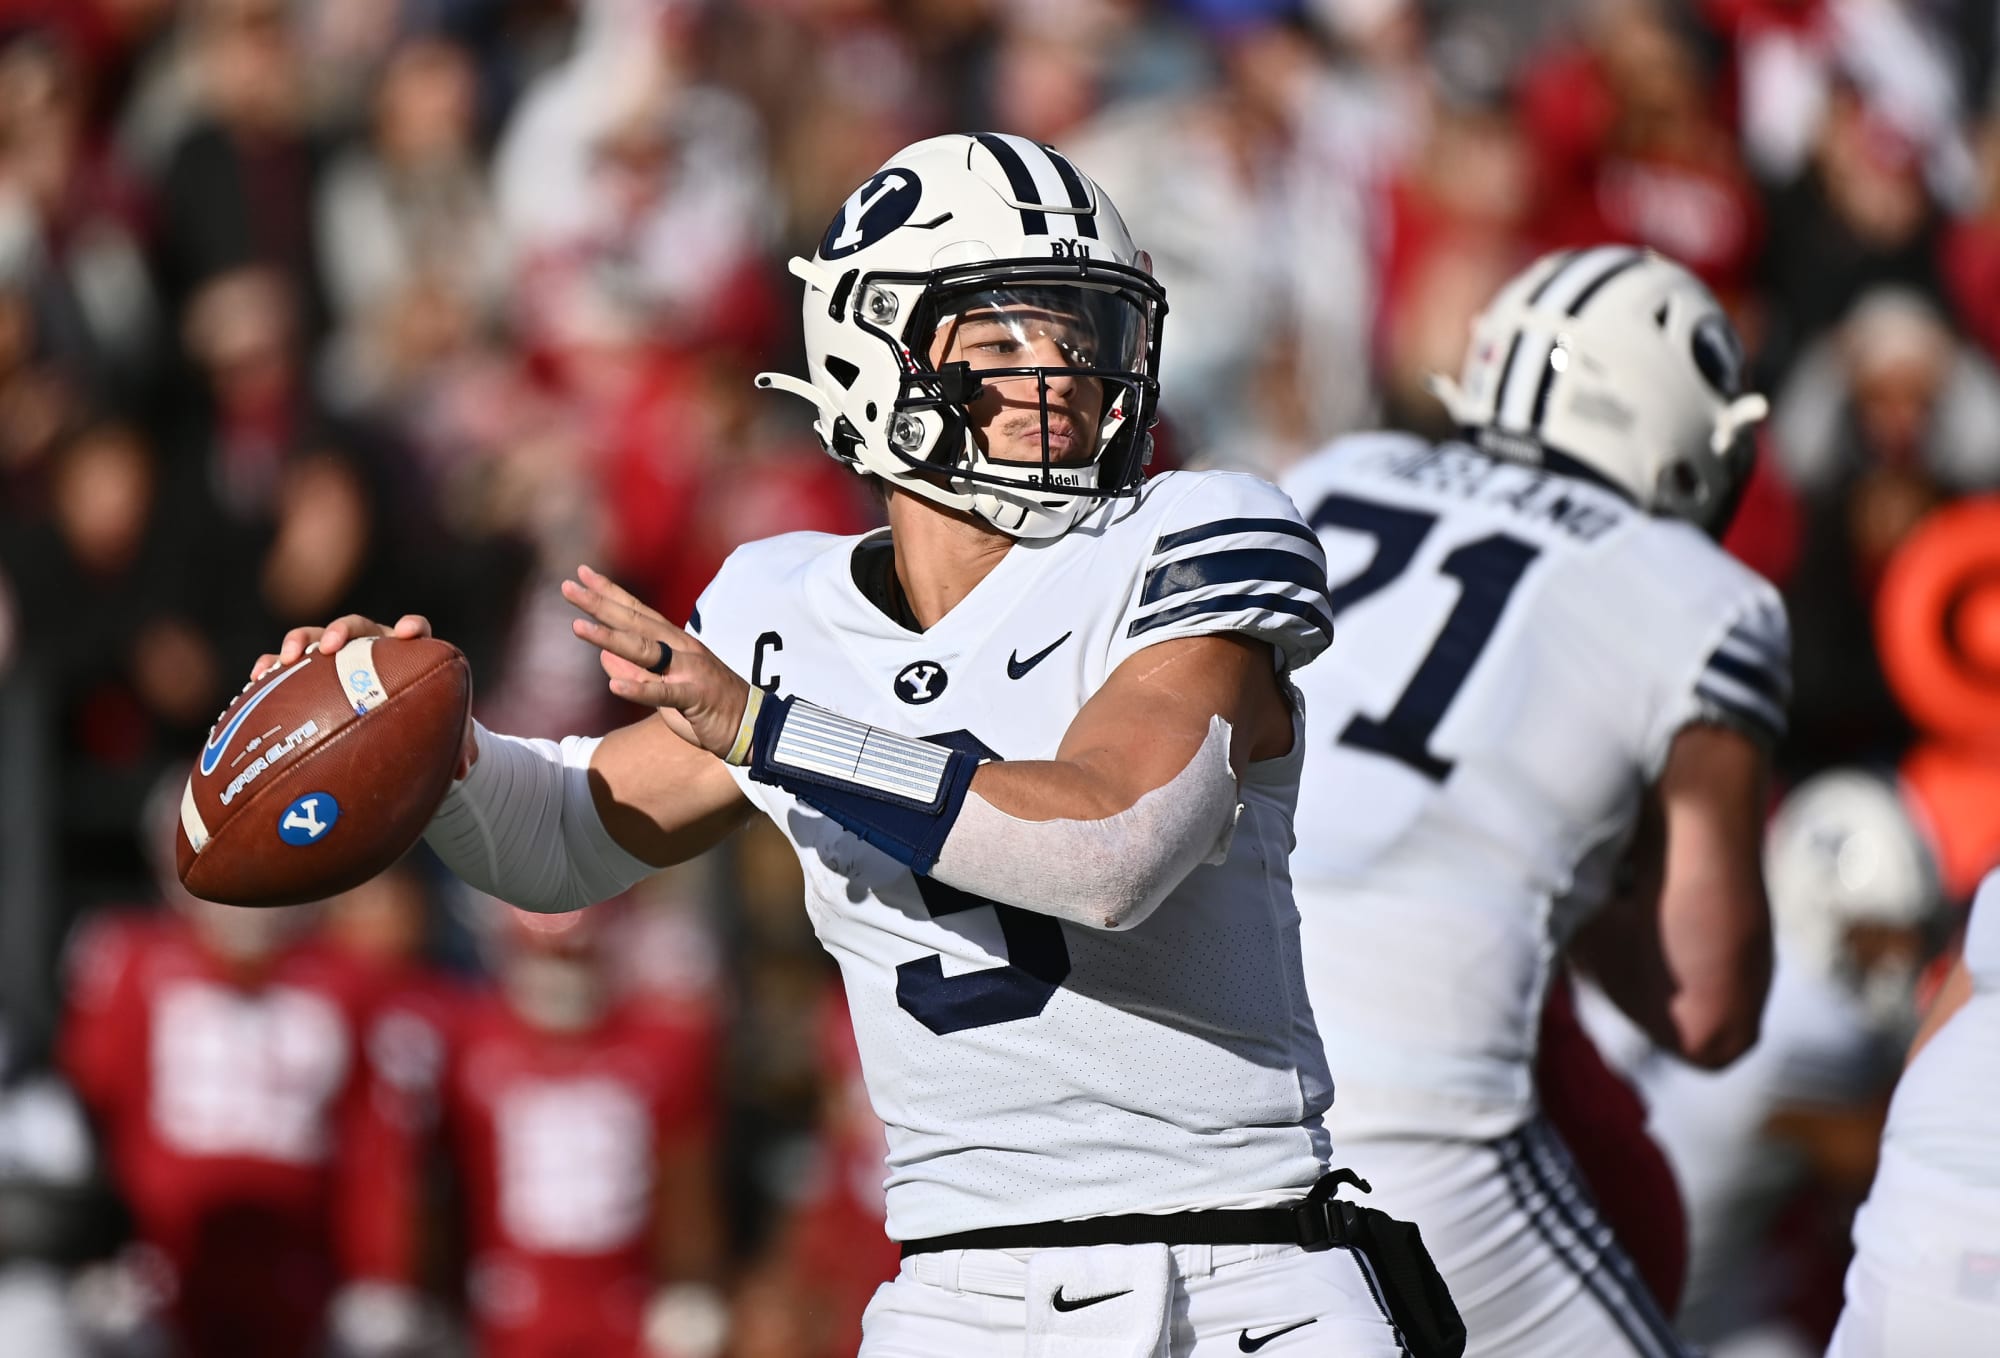 How to watch BYU Cougars football in 2022